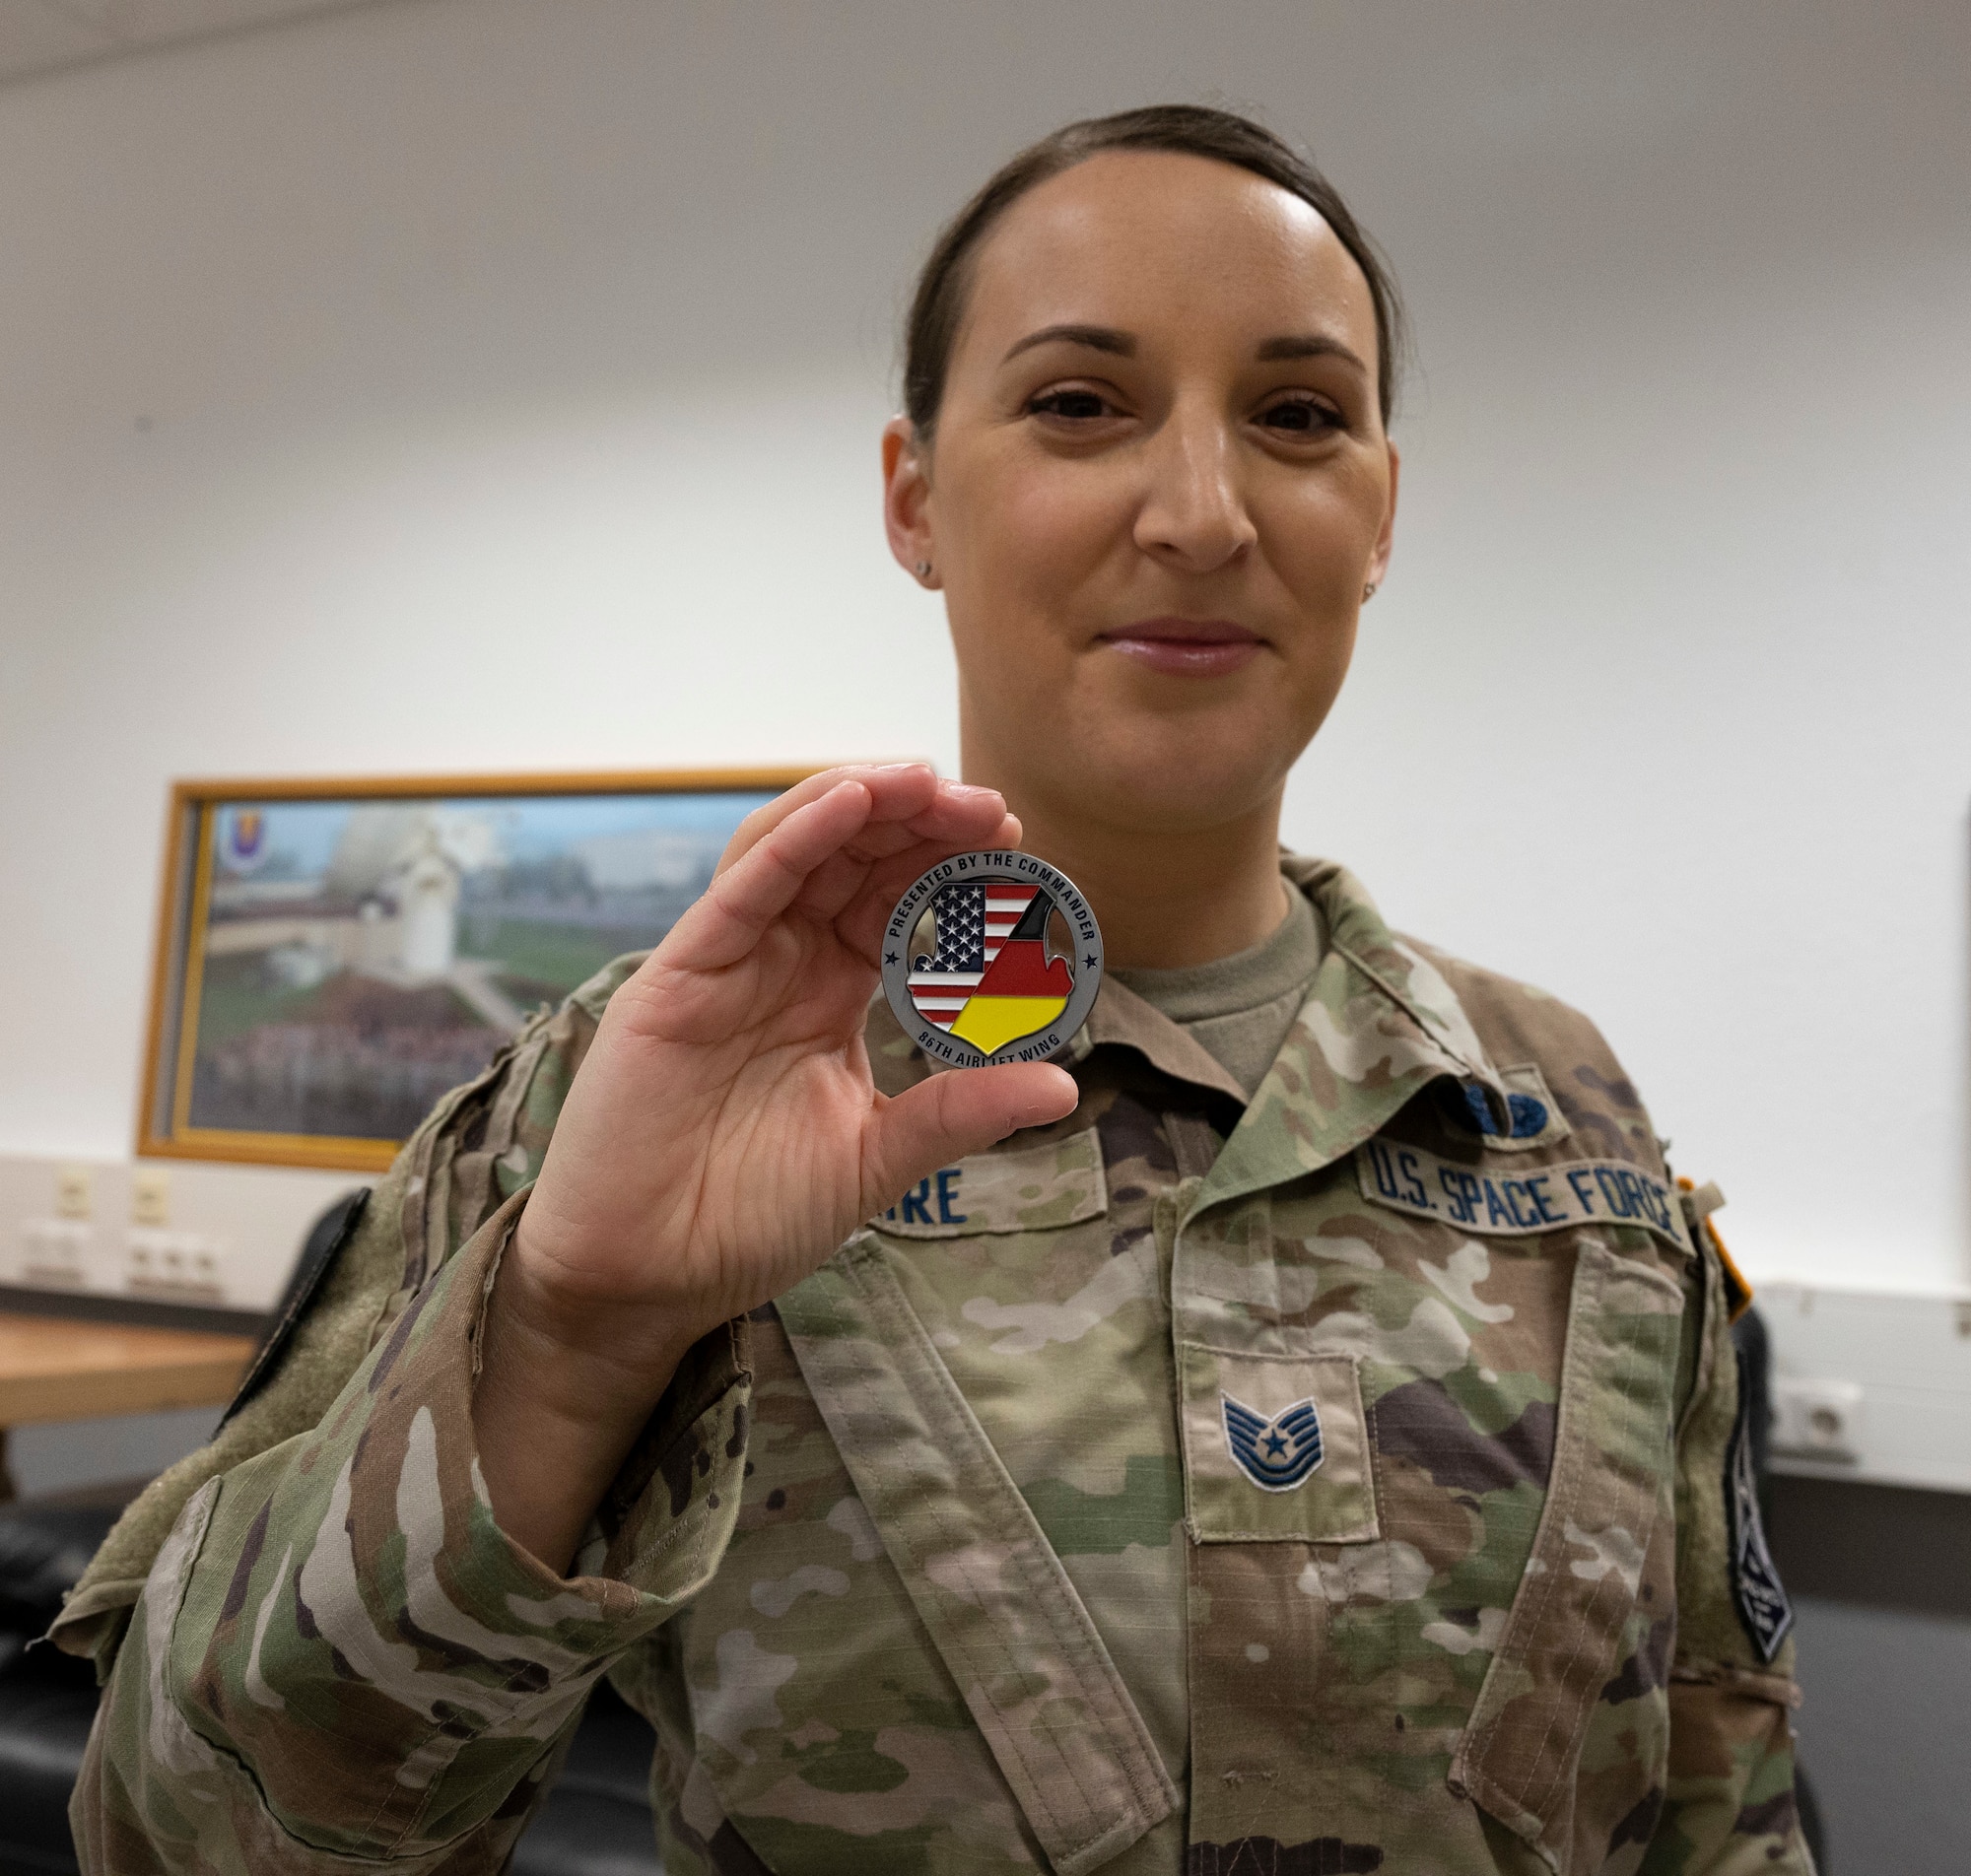 U.S. Space Force Tech. Sgt. Hollie Baire, 86th Communications Squadron non-commissioned officer in charge of the Technical Control Facility holds a coin at Ramstein Air Base, Germany, March 30, 2022. Baire was awarded the title of Airlifter of the Week because of her hard work, dedication and use of innovative ideas to increase efficiency across the 86th Communications Squadron. (U.S. Air Force photo by Senior Airman Thomas Karol)